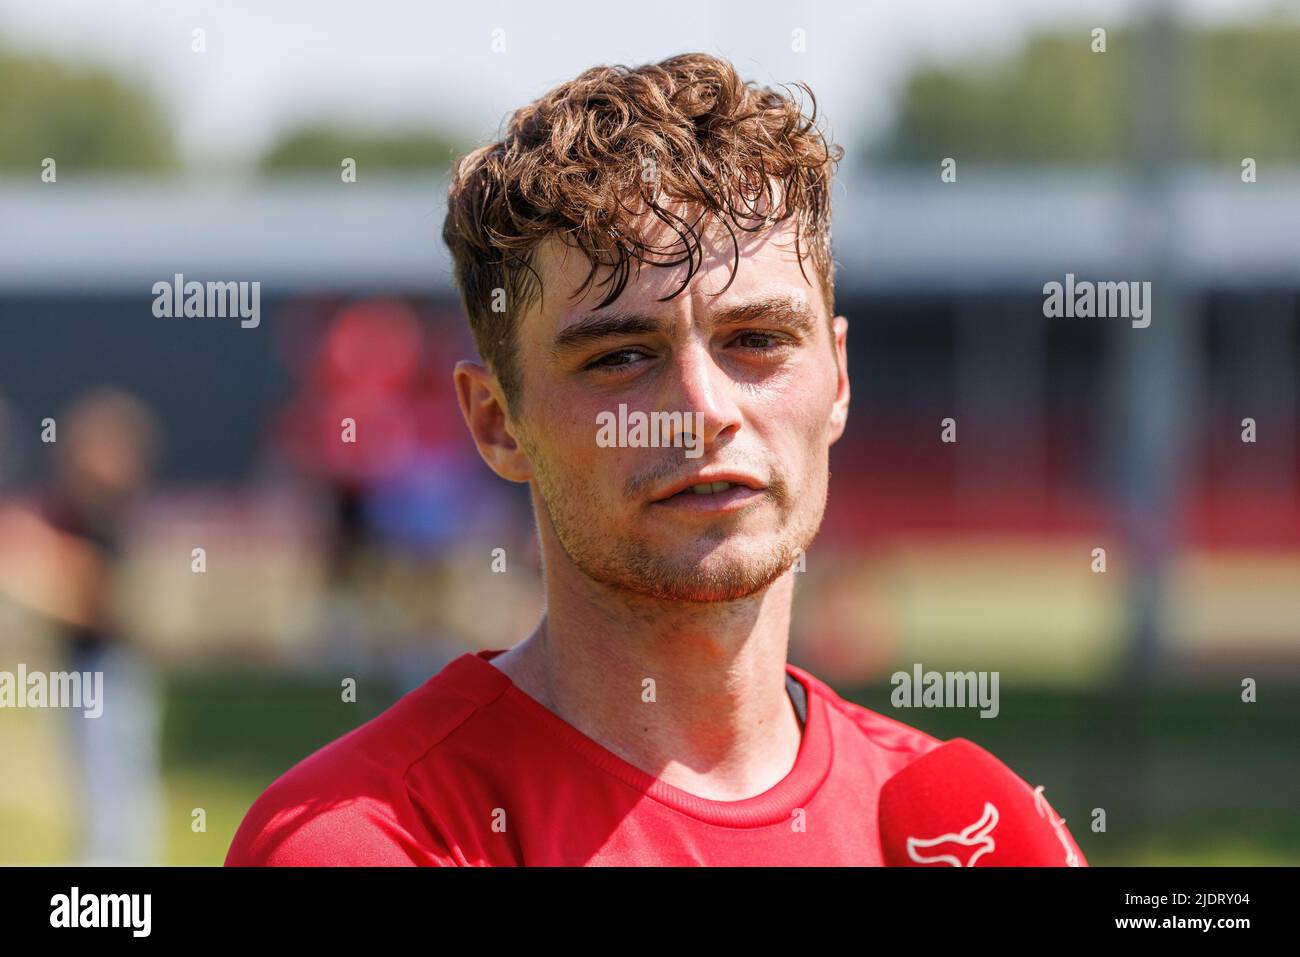 ALMERE, 23-06-2022 , Yanmar stadium , season 2022 / 2023 , Dutch Football Keuken Kampioen Divisie. Almere City FC test player Jan Ras during the First training Almere City (Photo by Pro Shots/Sipa USA) *** World Rights Except Austria and The Netherlands *** Stock Photo